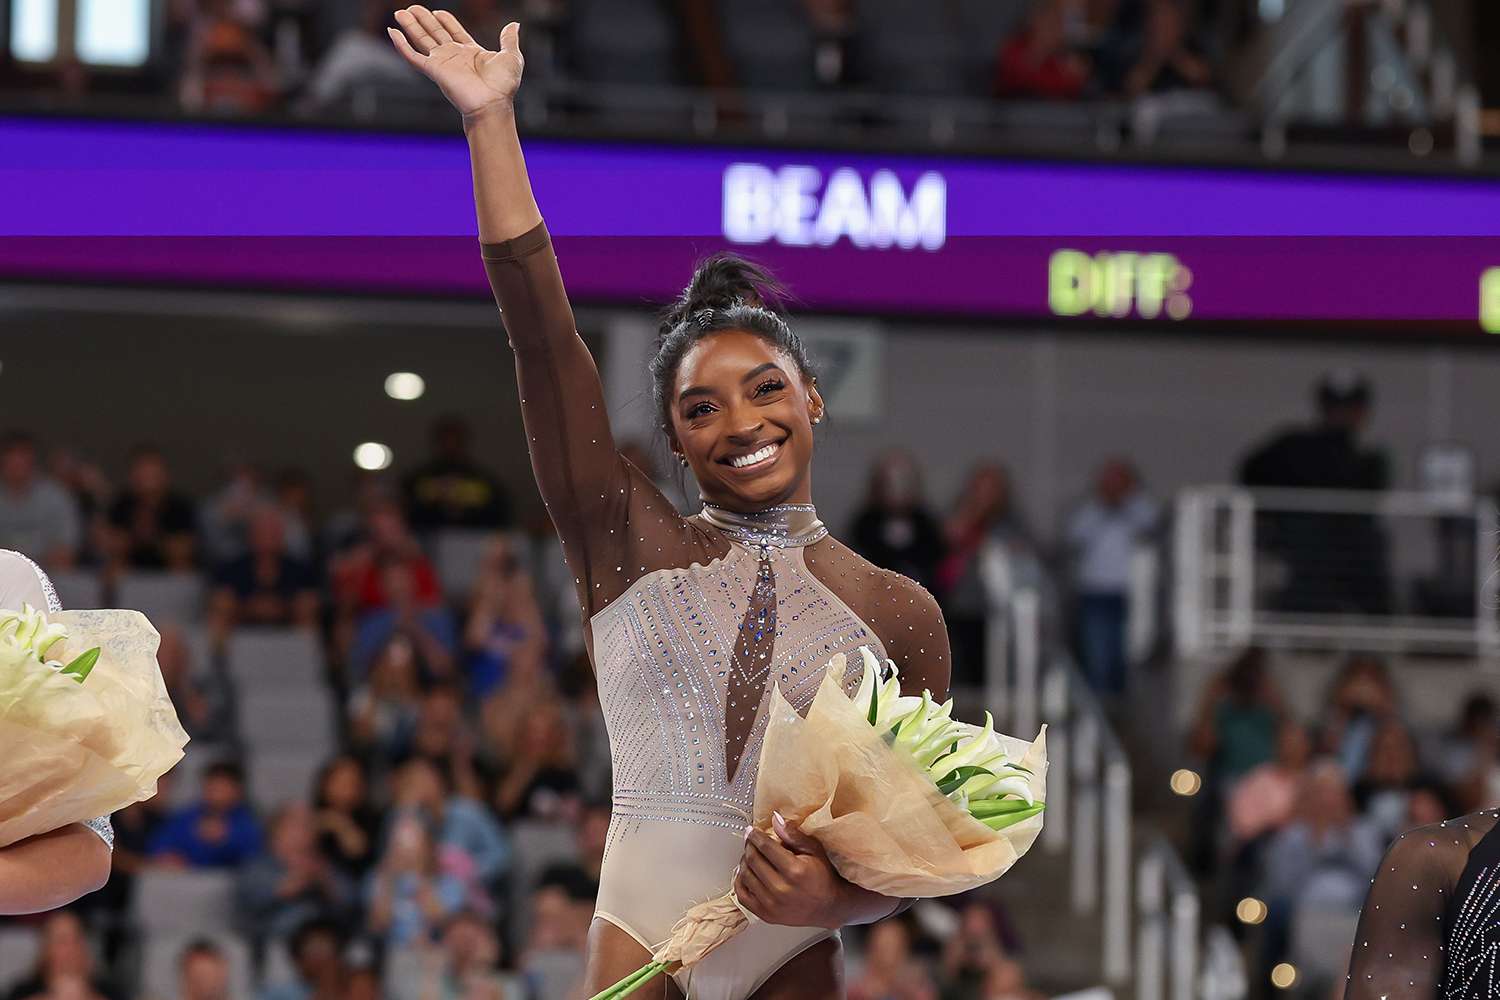 Simone Biles’ Husband and Family Are Locked in as She Wins Historic 9th National Championship – Watch!